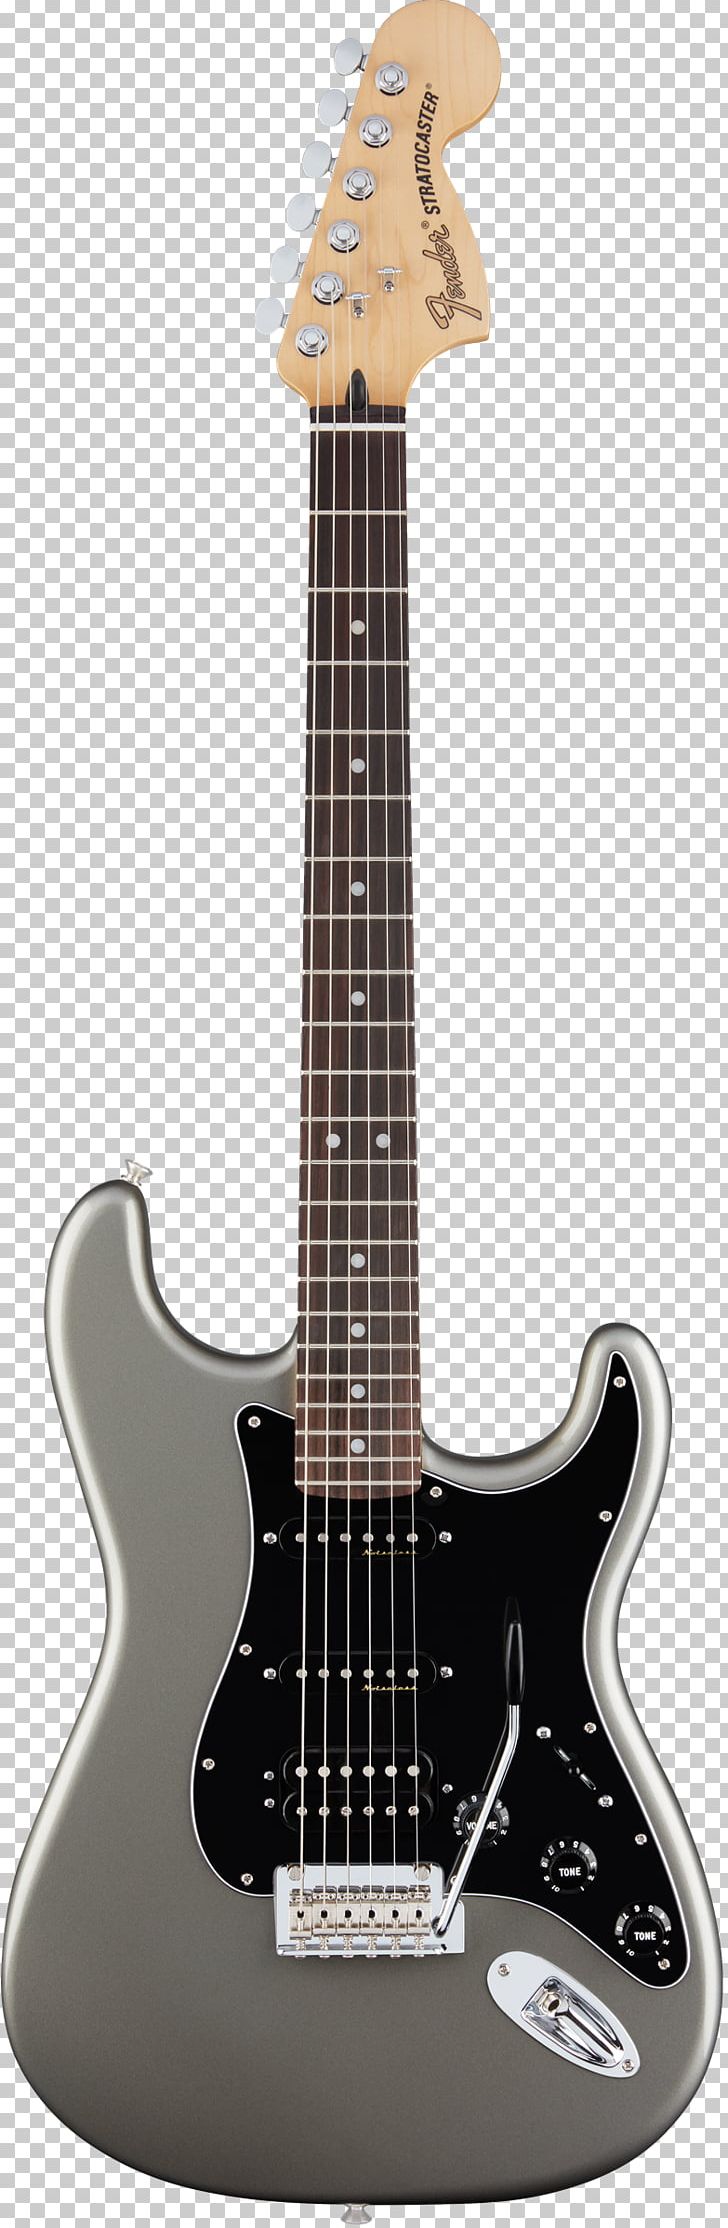 Fender Stratocaster Fender Telecaster Deluxe Fender Musical Instruments Corporation Guitar PNG, Clipart, Acoustic Electric Guitar, Bass Guitar, Electric Guitar, Guitar, Guitar Accessory Free PNG Download